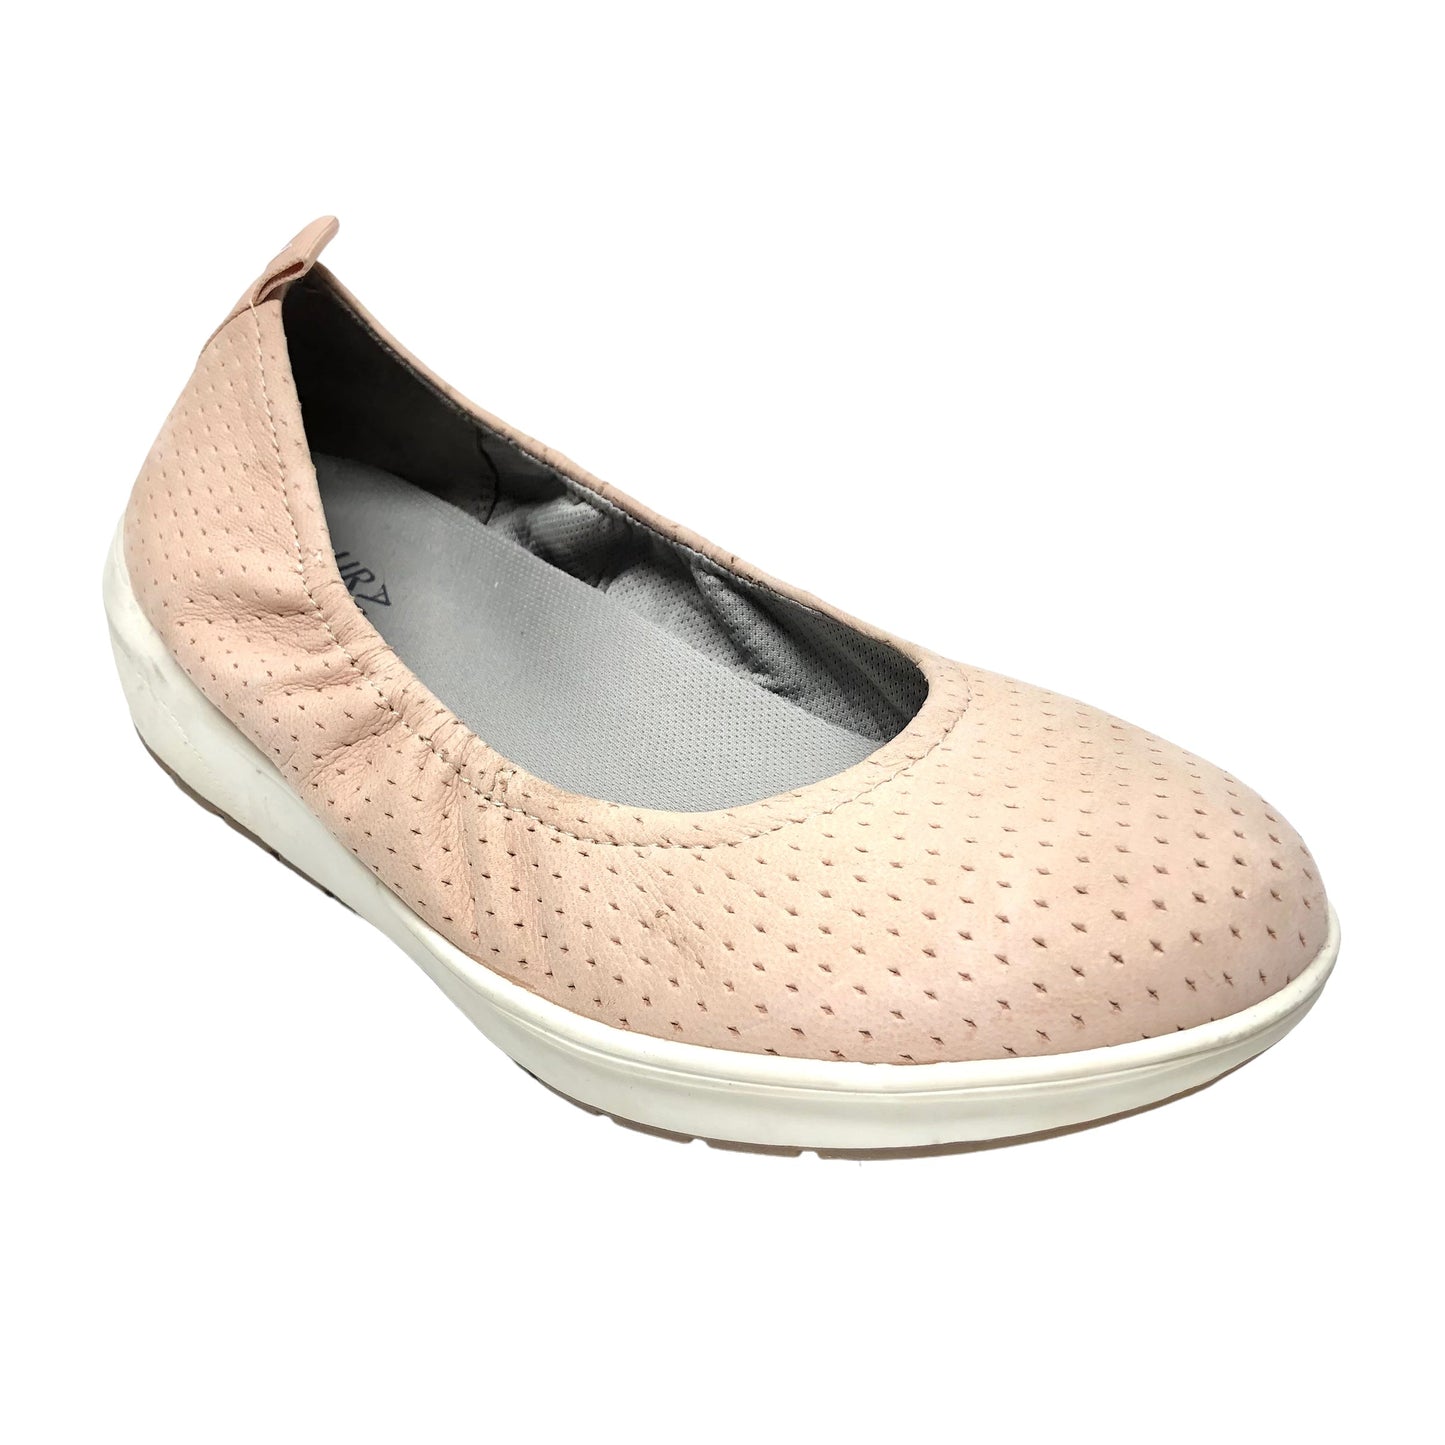 Shoes Flats Ballet By Naturalizer  Size: 9.5